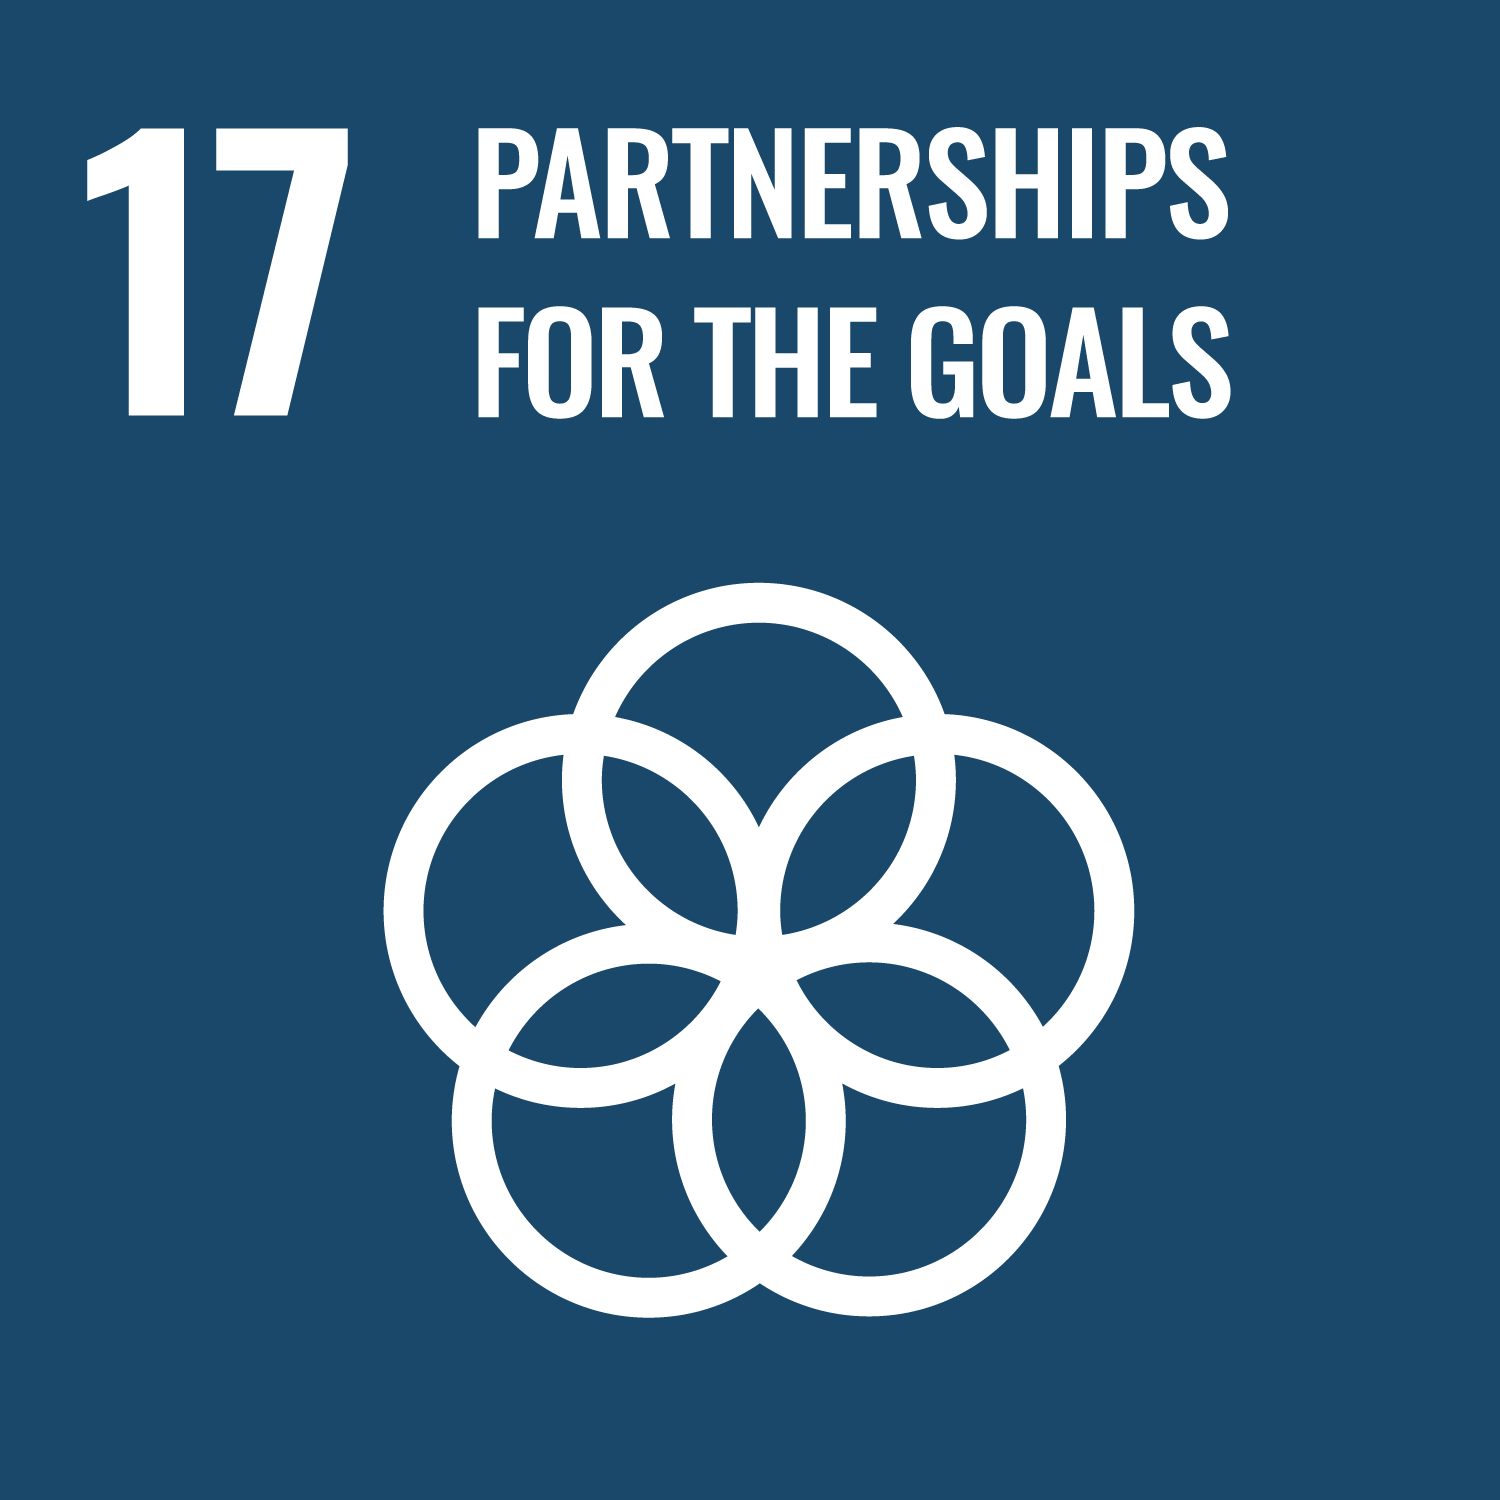 An icon of UN SDG #17 - Partnerships for the Goals. It depicts 5 circles overlaying each other against a dark blue background.